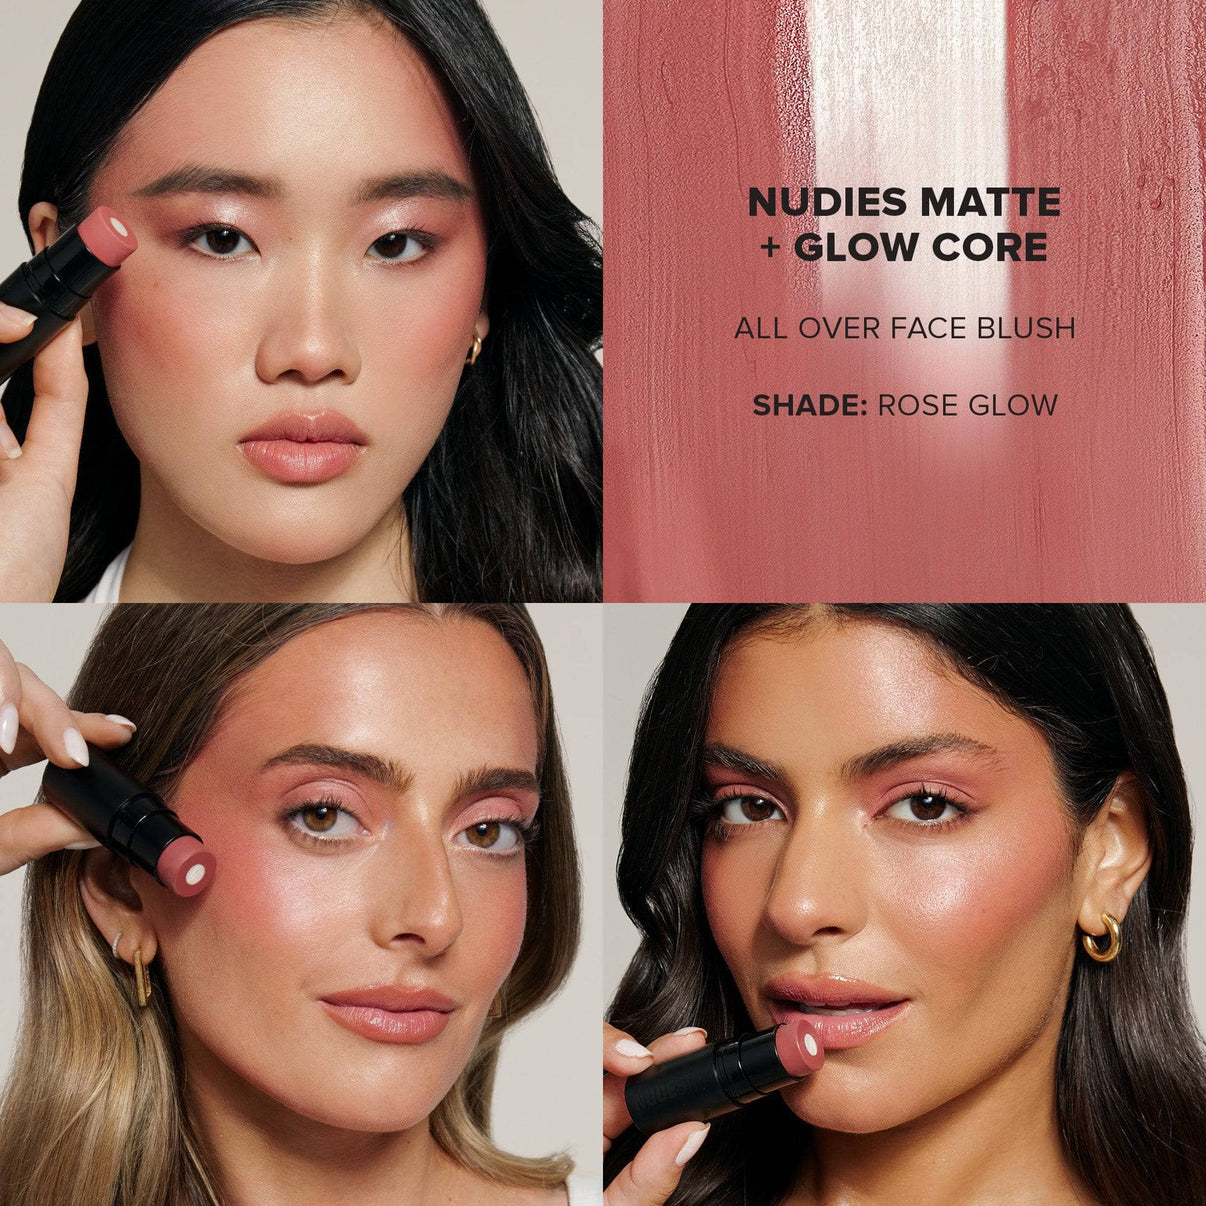 Grid with models wearing rose glow from The Ultimate Blush & Glow Set